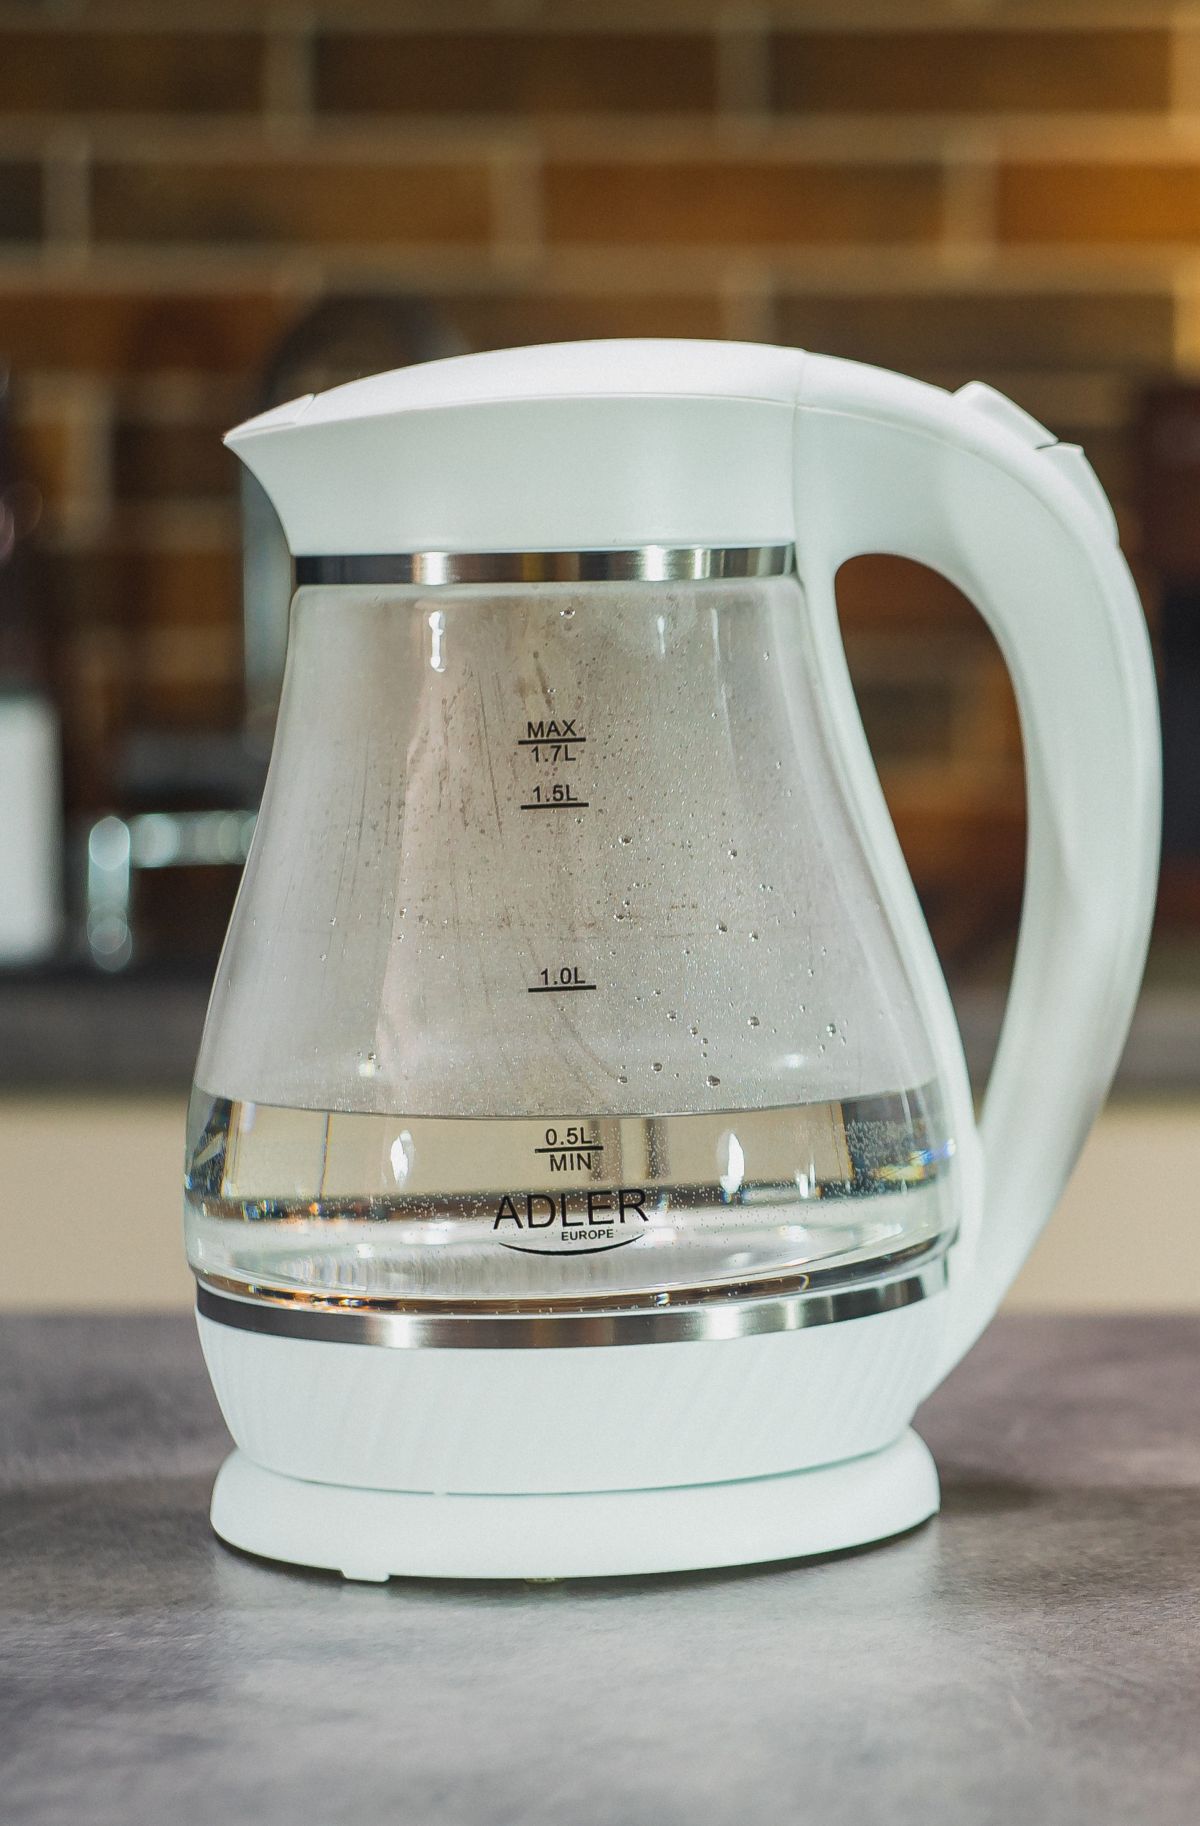 Adler AD 1274 white Kettle glass electric 1,7L